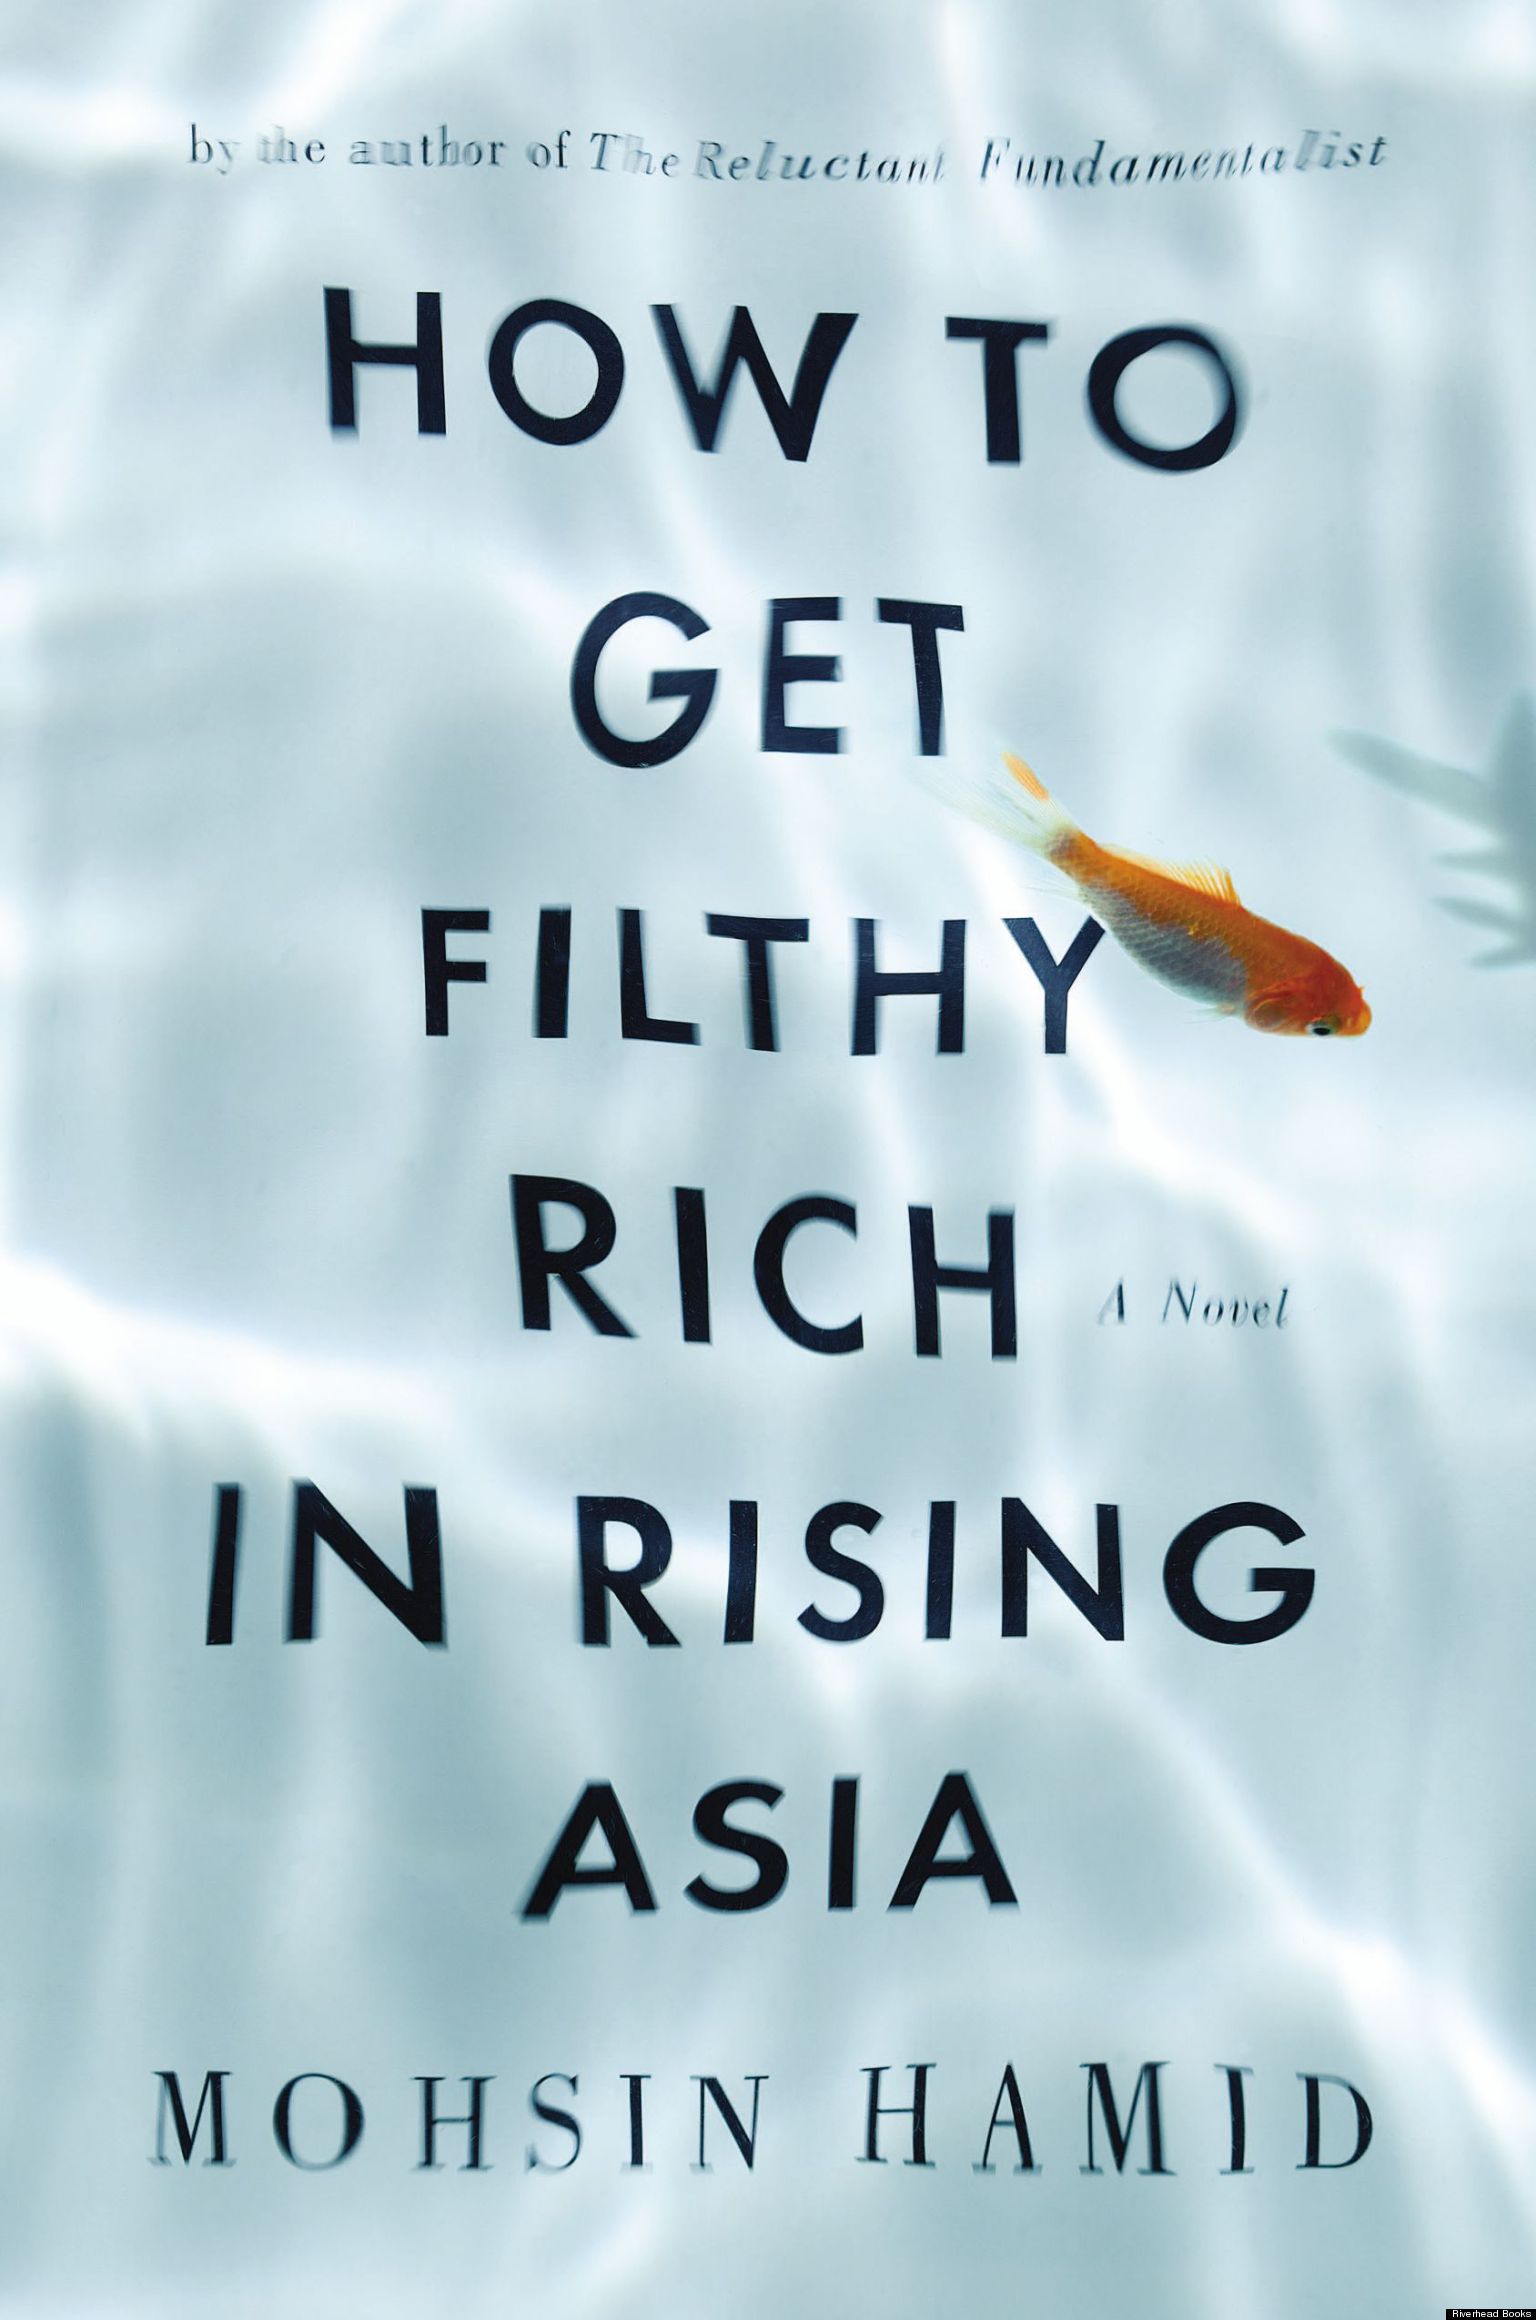 How To Get Filthy Rich In Rising Asia The Book We're Talking About This Week